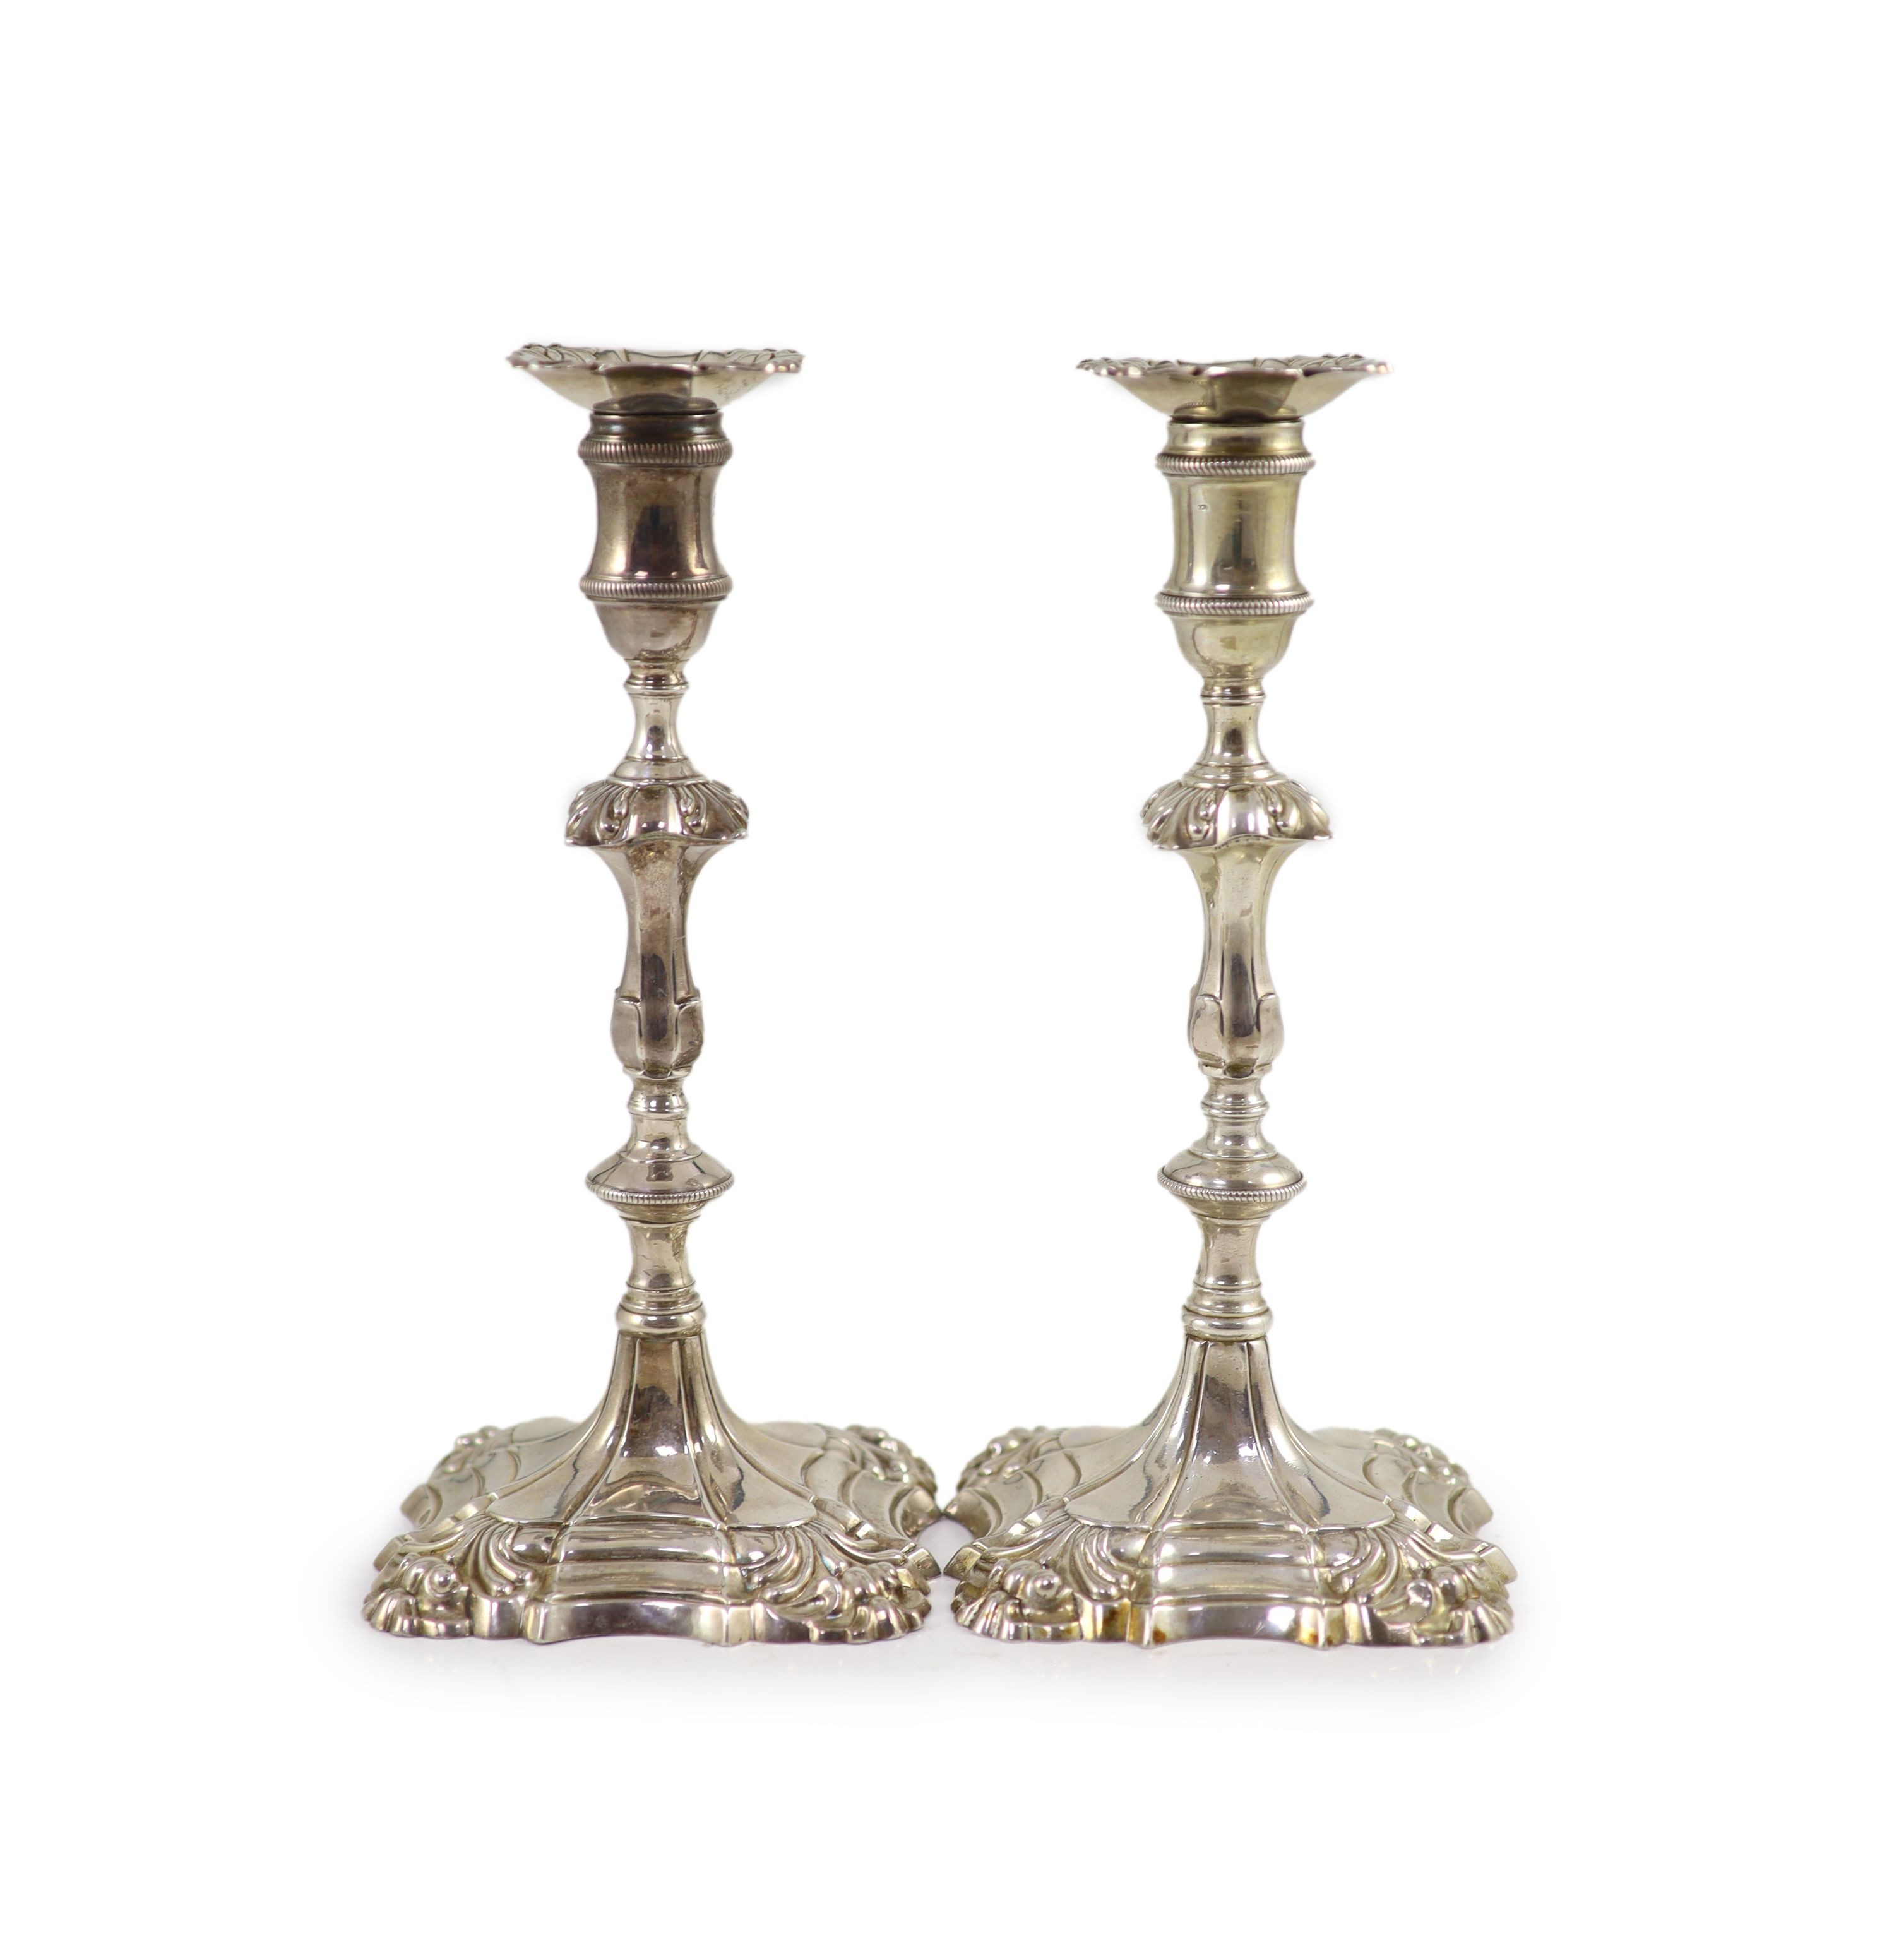 A pair of early George III cast silver candlesticks by William Cafe